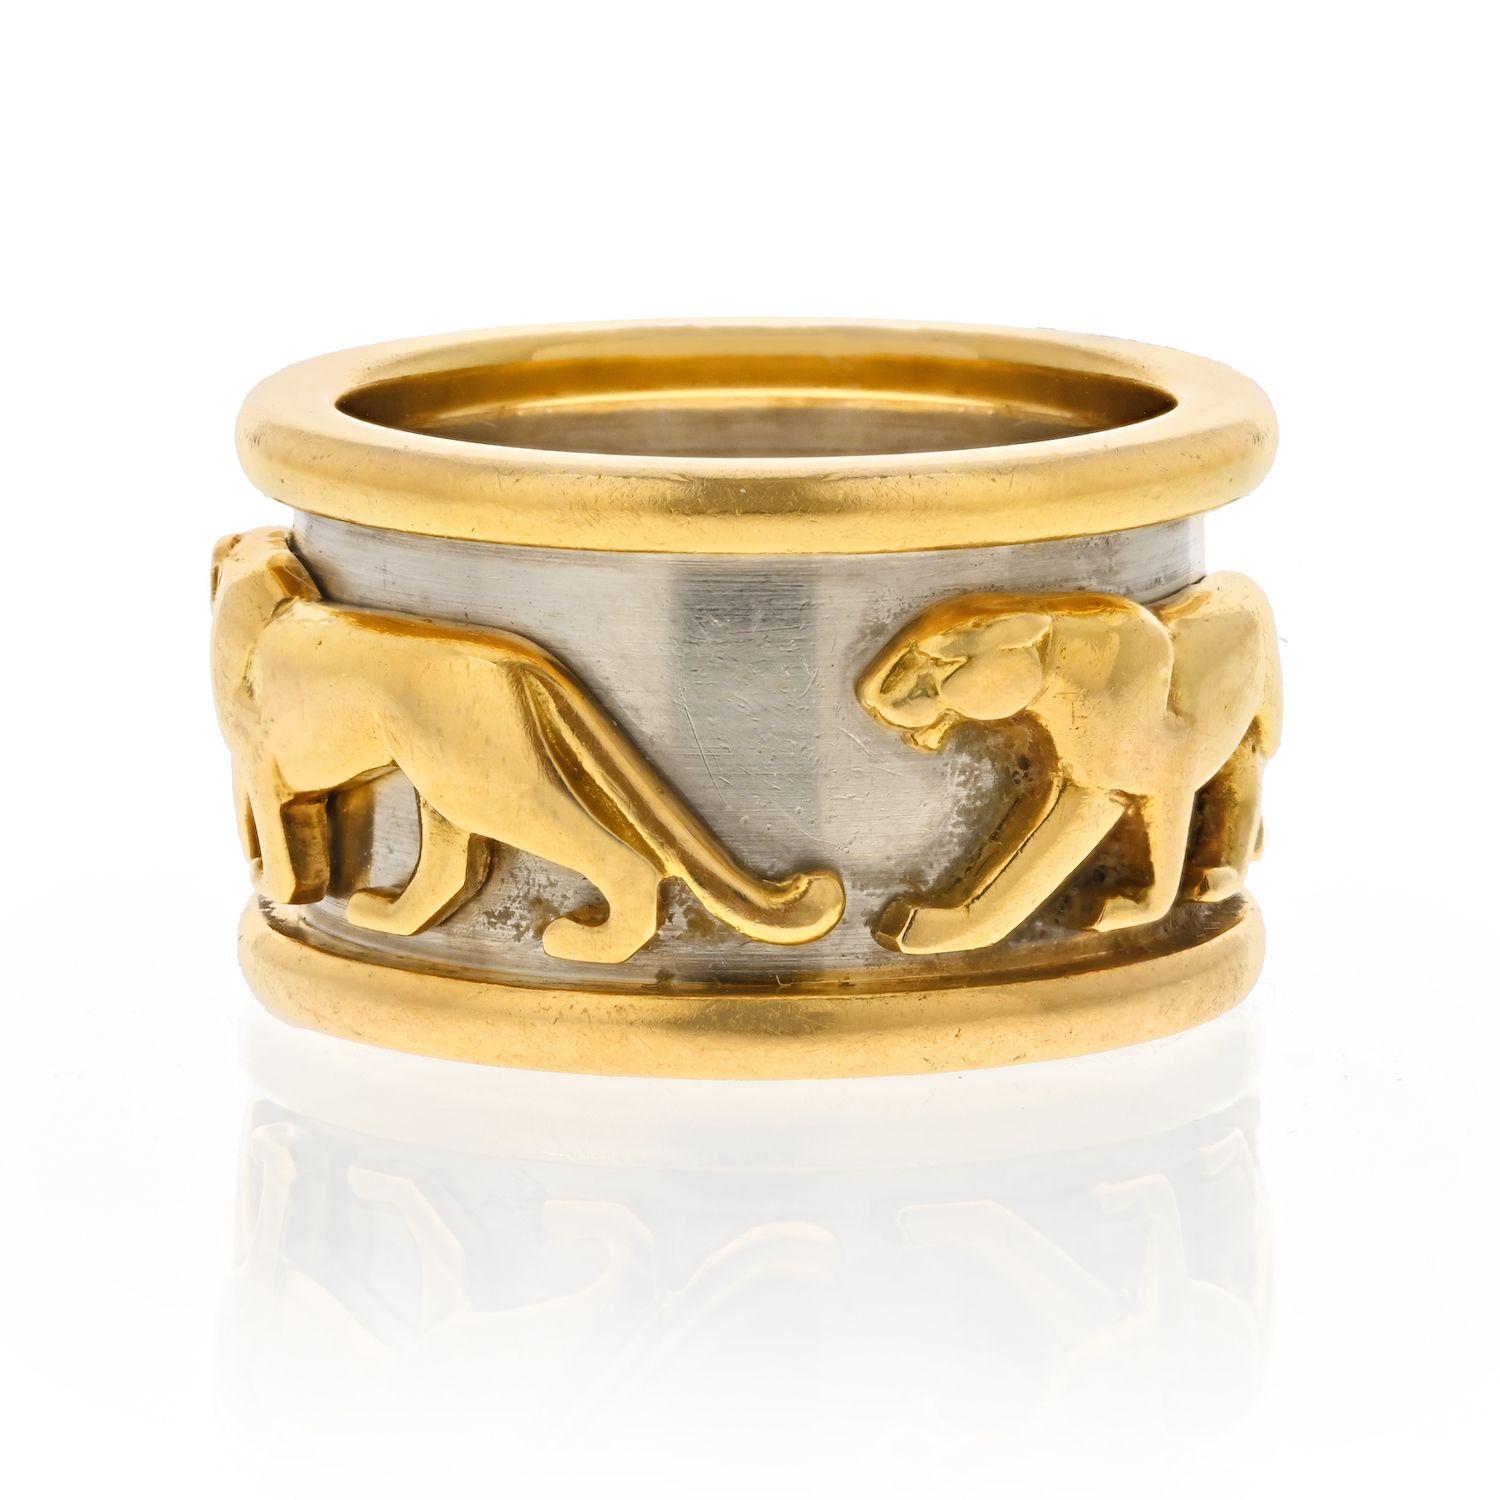 This panther ring from Cartier is a classic, yet feels very current and edgy. Instantly recognizable as Cartier, fully hallmarked and in excellent near mint condition.

WEIGHT: 12 Grams
METAL: 18k Yellow Gold
SIZE: 5
WIDTH OF BAND: 12mm